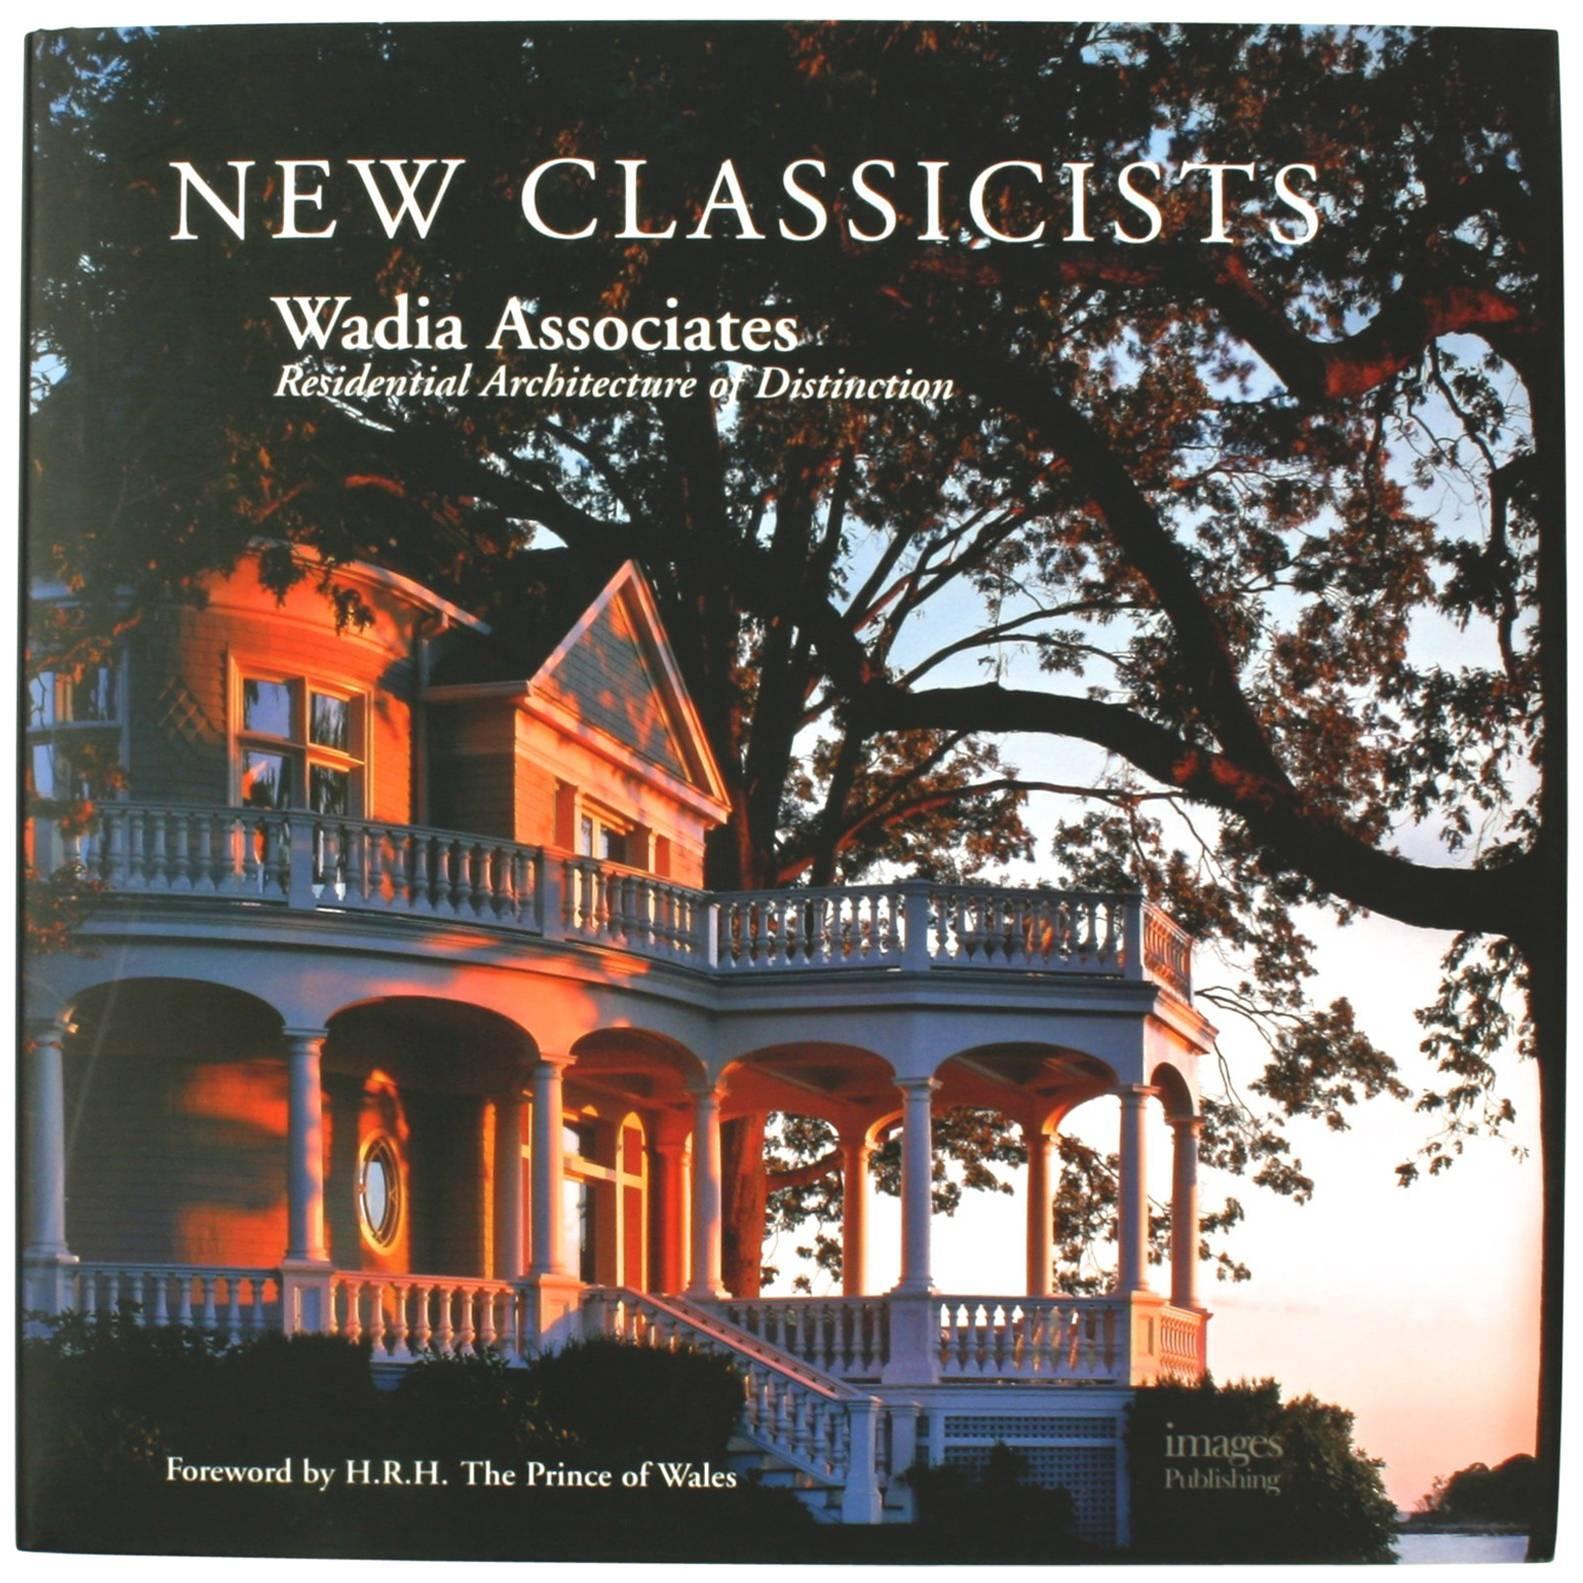 New Classicists Wadia Associates, Residential Architecture of Distinction